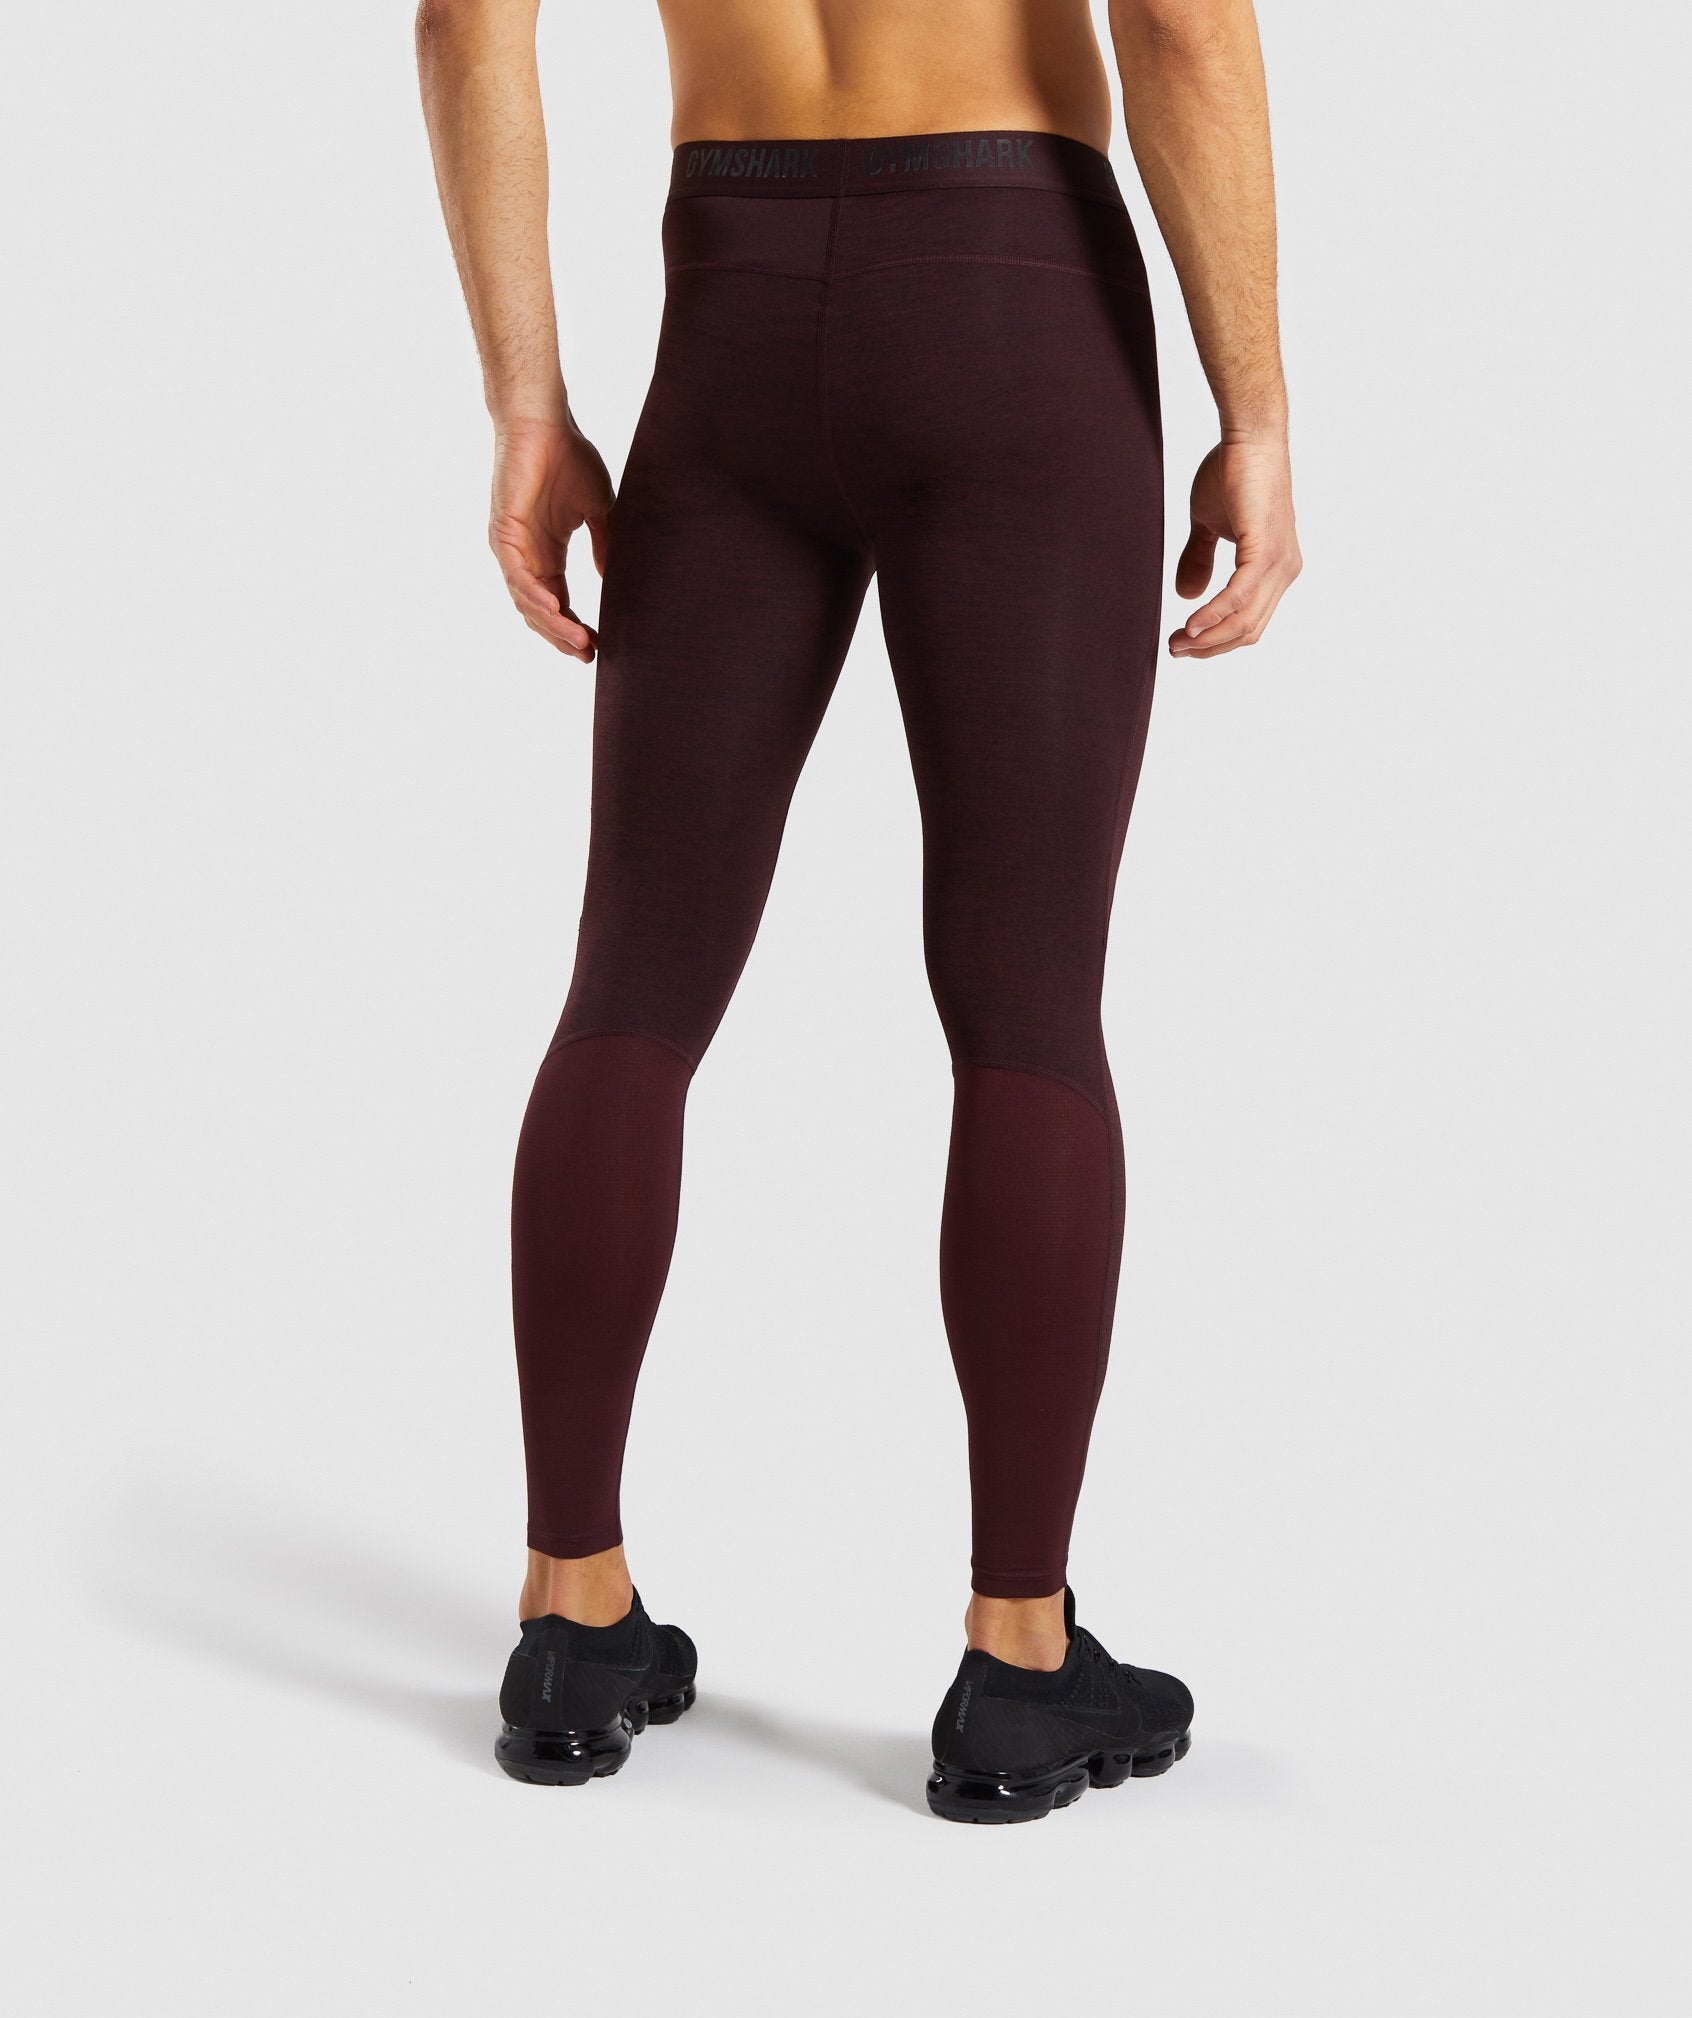 Element+ Baselayer Leggings in Ox Red Marl - view 2